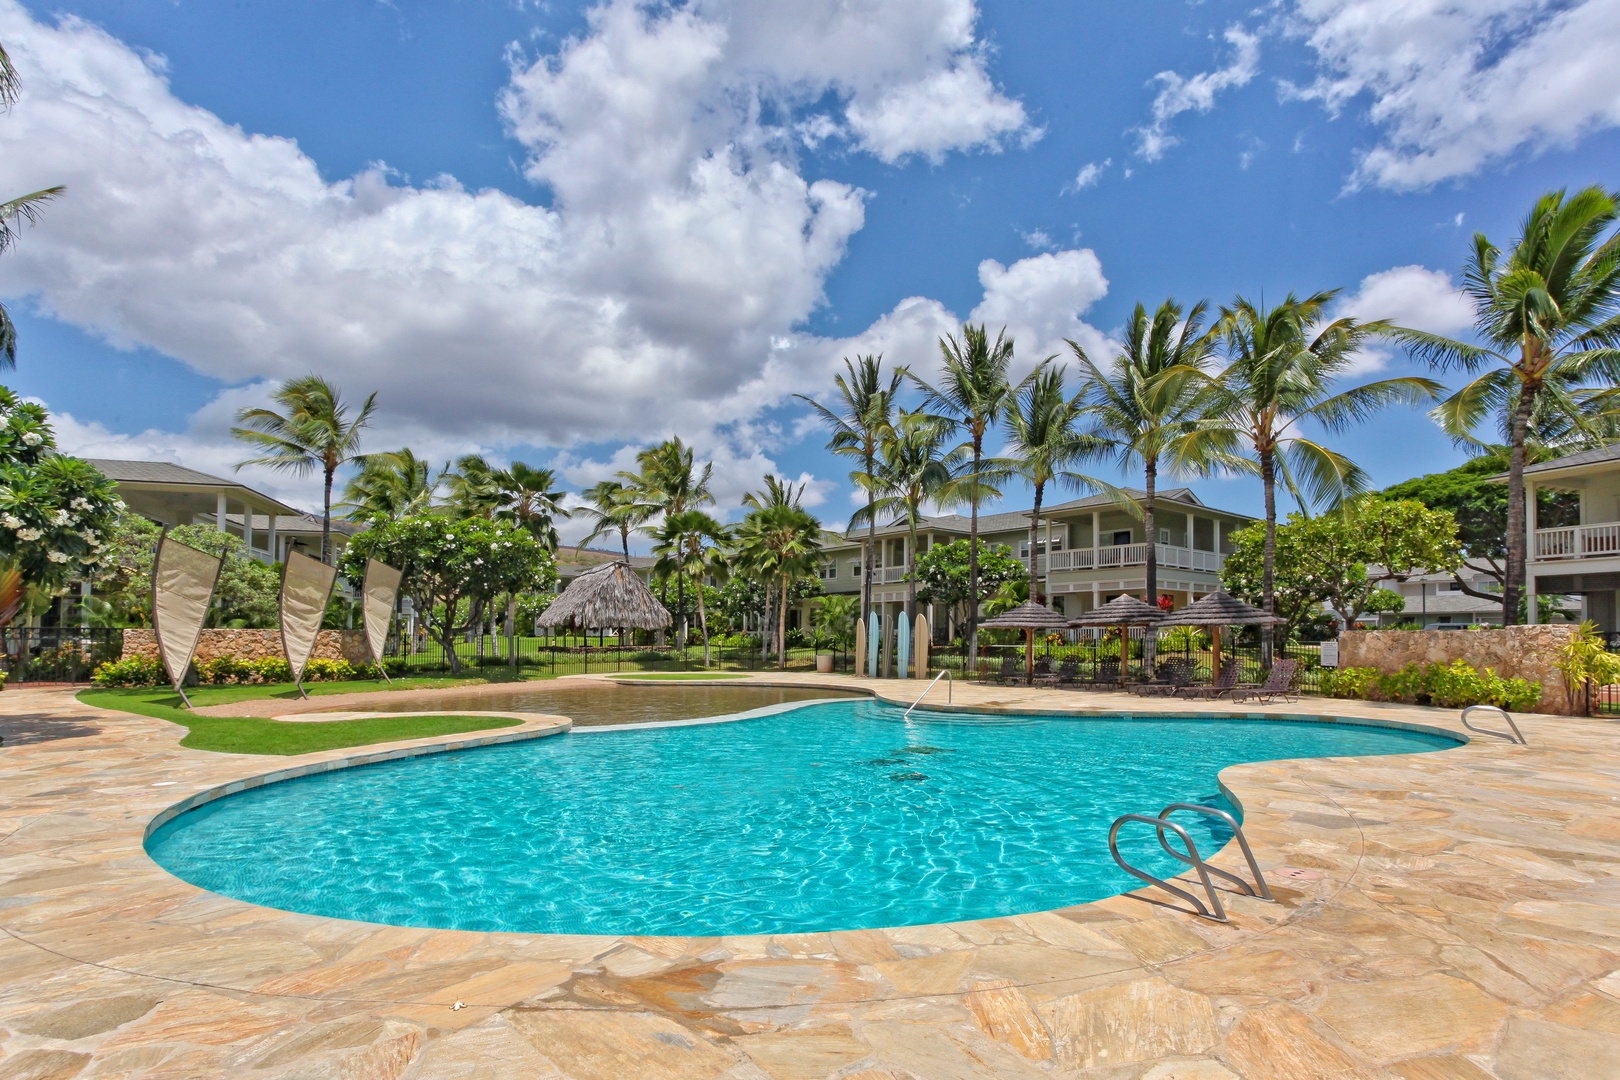 Kapolei Vacation Rentals, Coconut Plantation 1108-2 - Go for a swim in the sparkling waters and rest under the sun at the community pool.